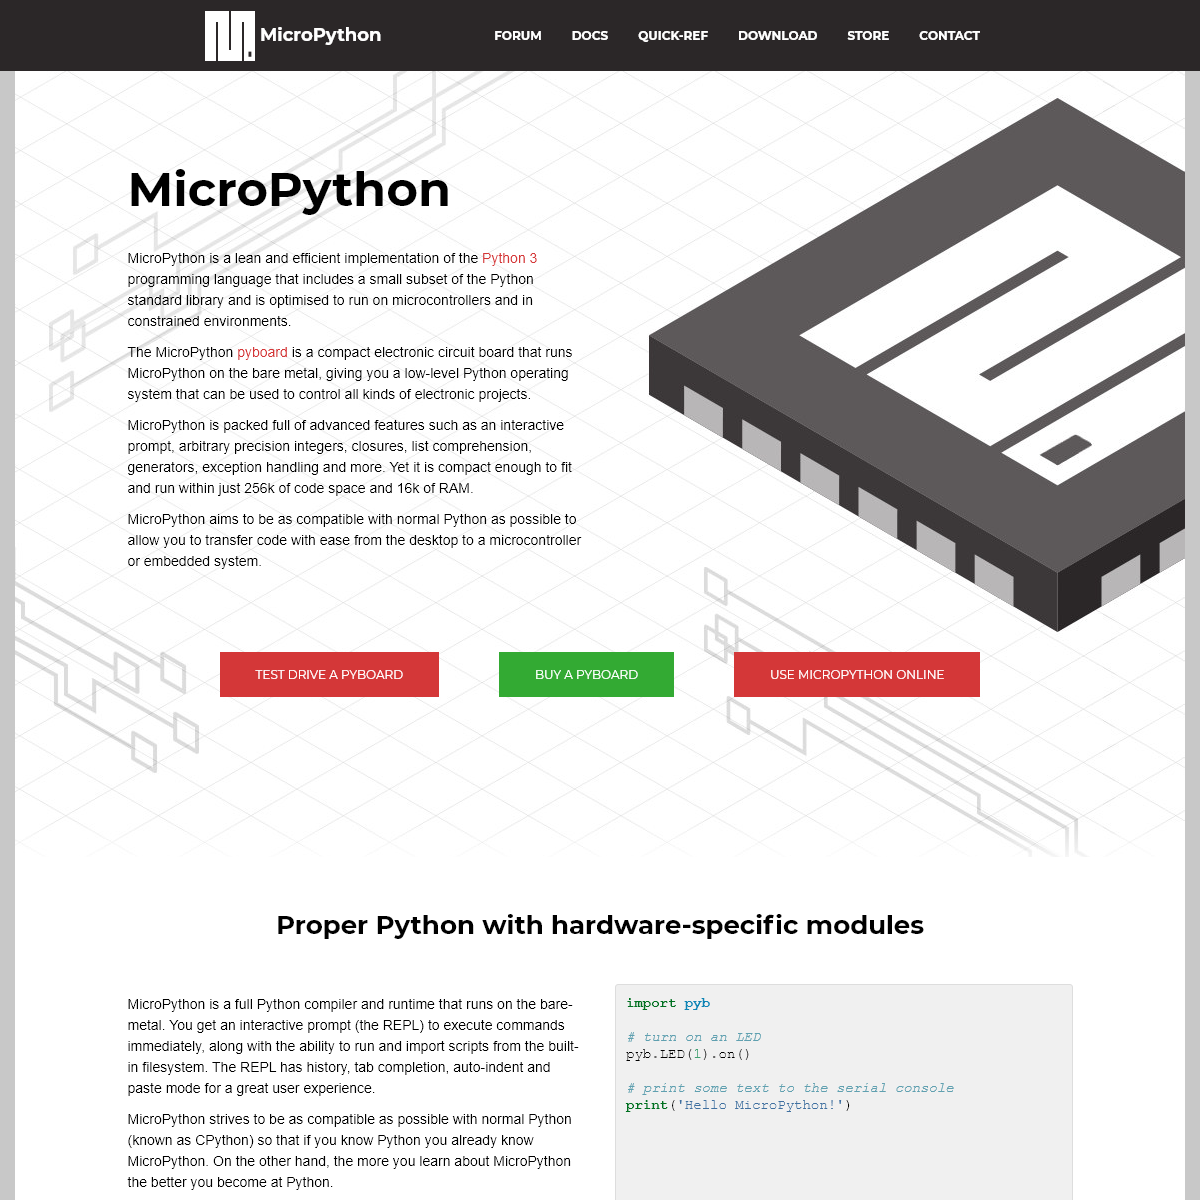 A complete backup of micropython.org